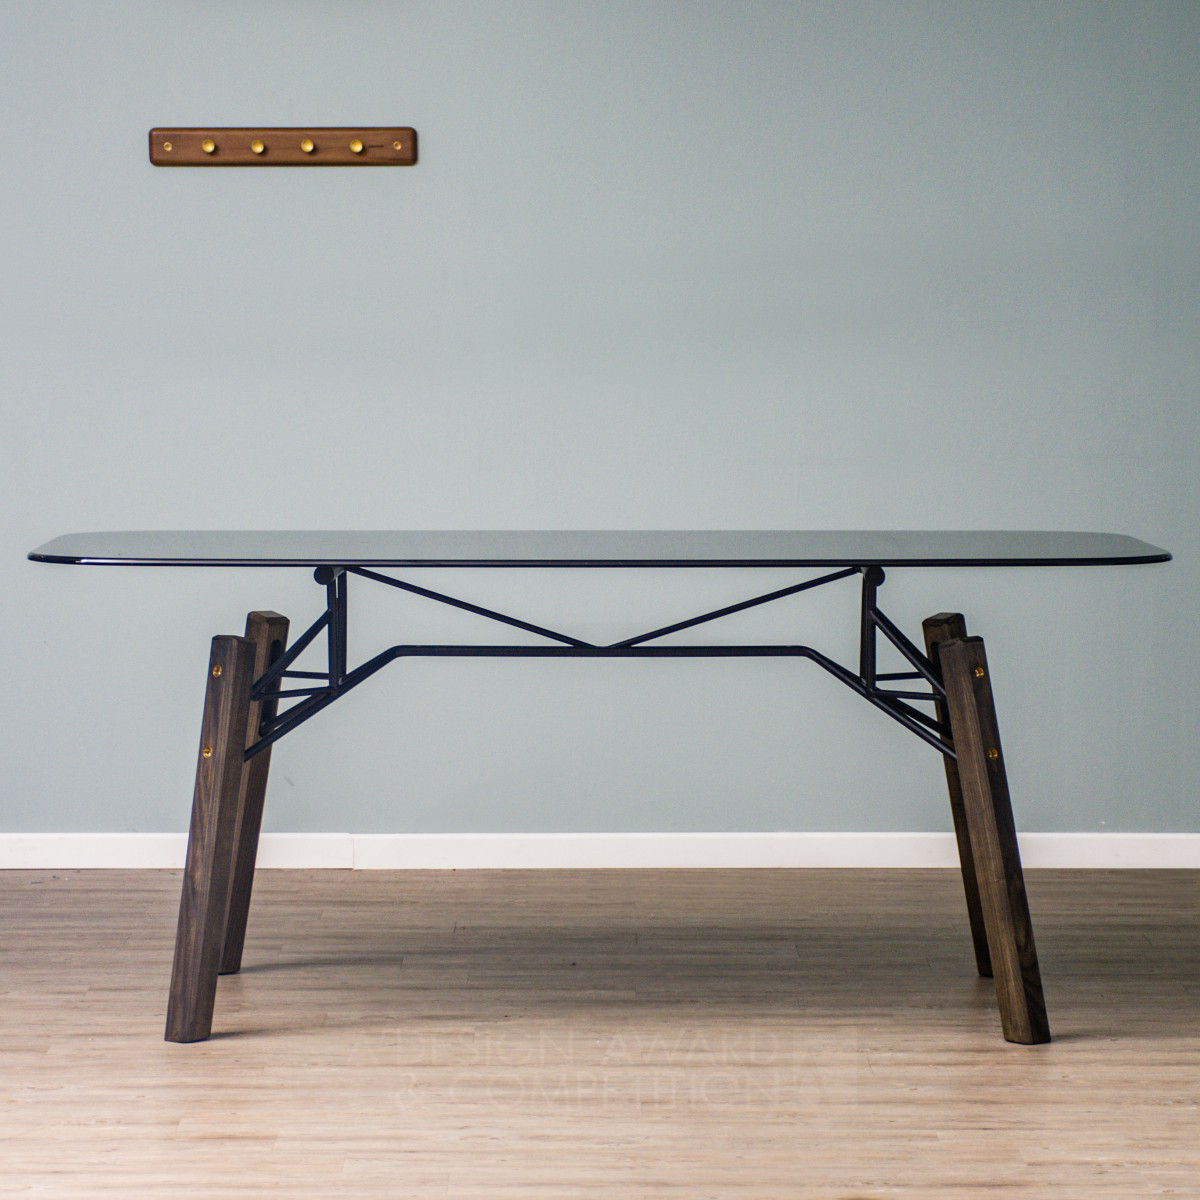 Hangar Dining Table by Amos Goh